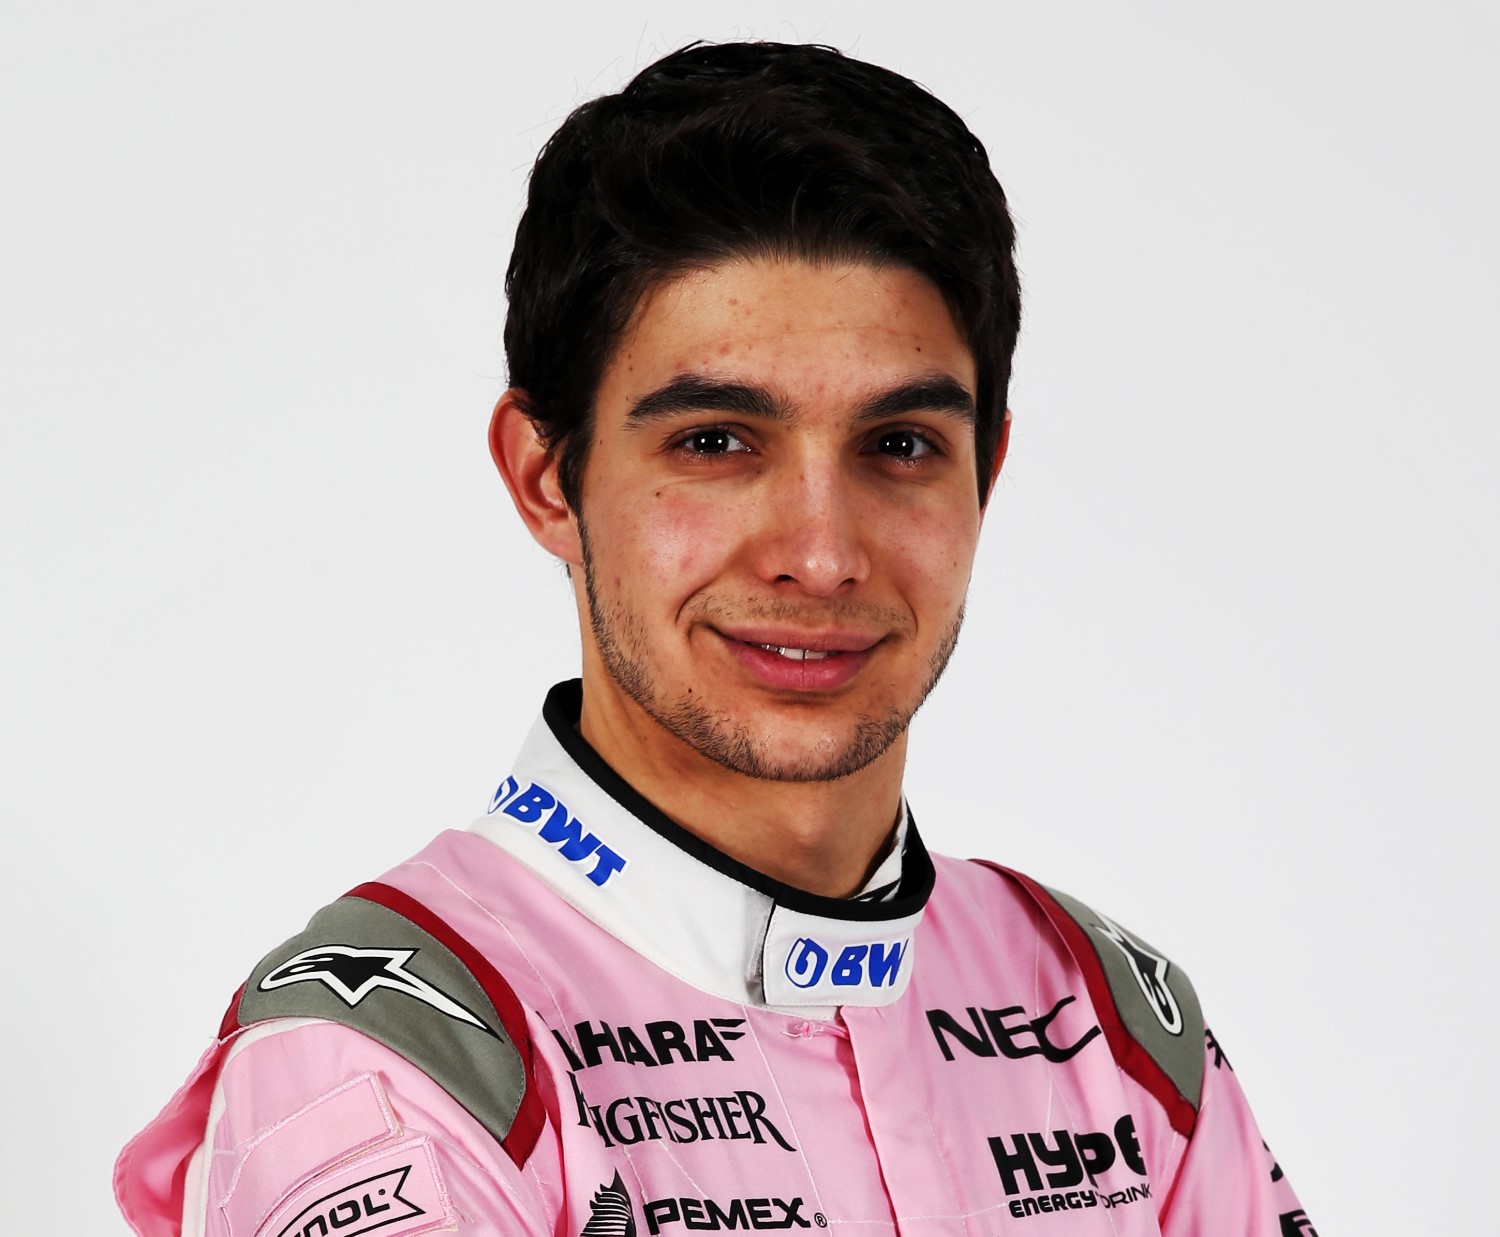 If Daddy Stroll buys Force India he will not want Ocon on the team to make his son look like a wanker